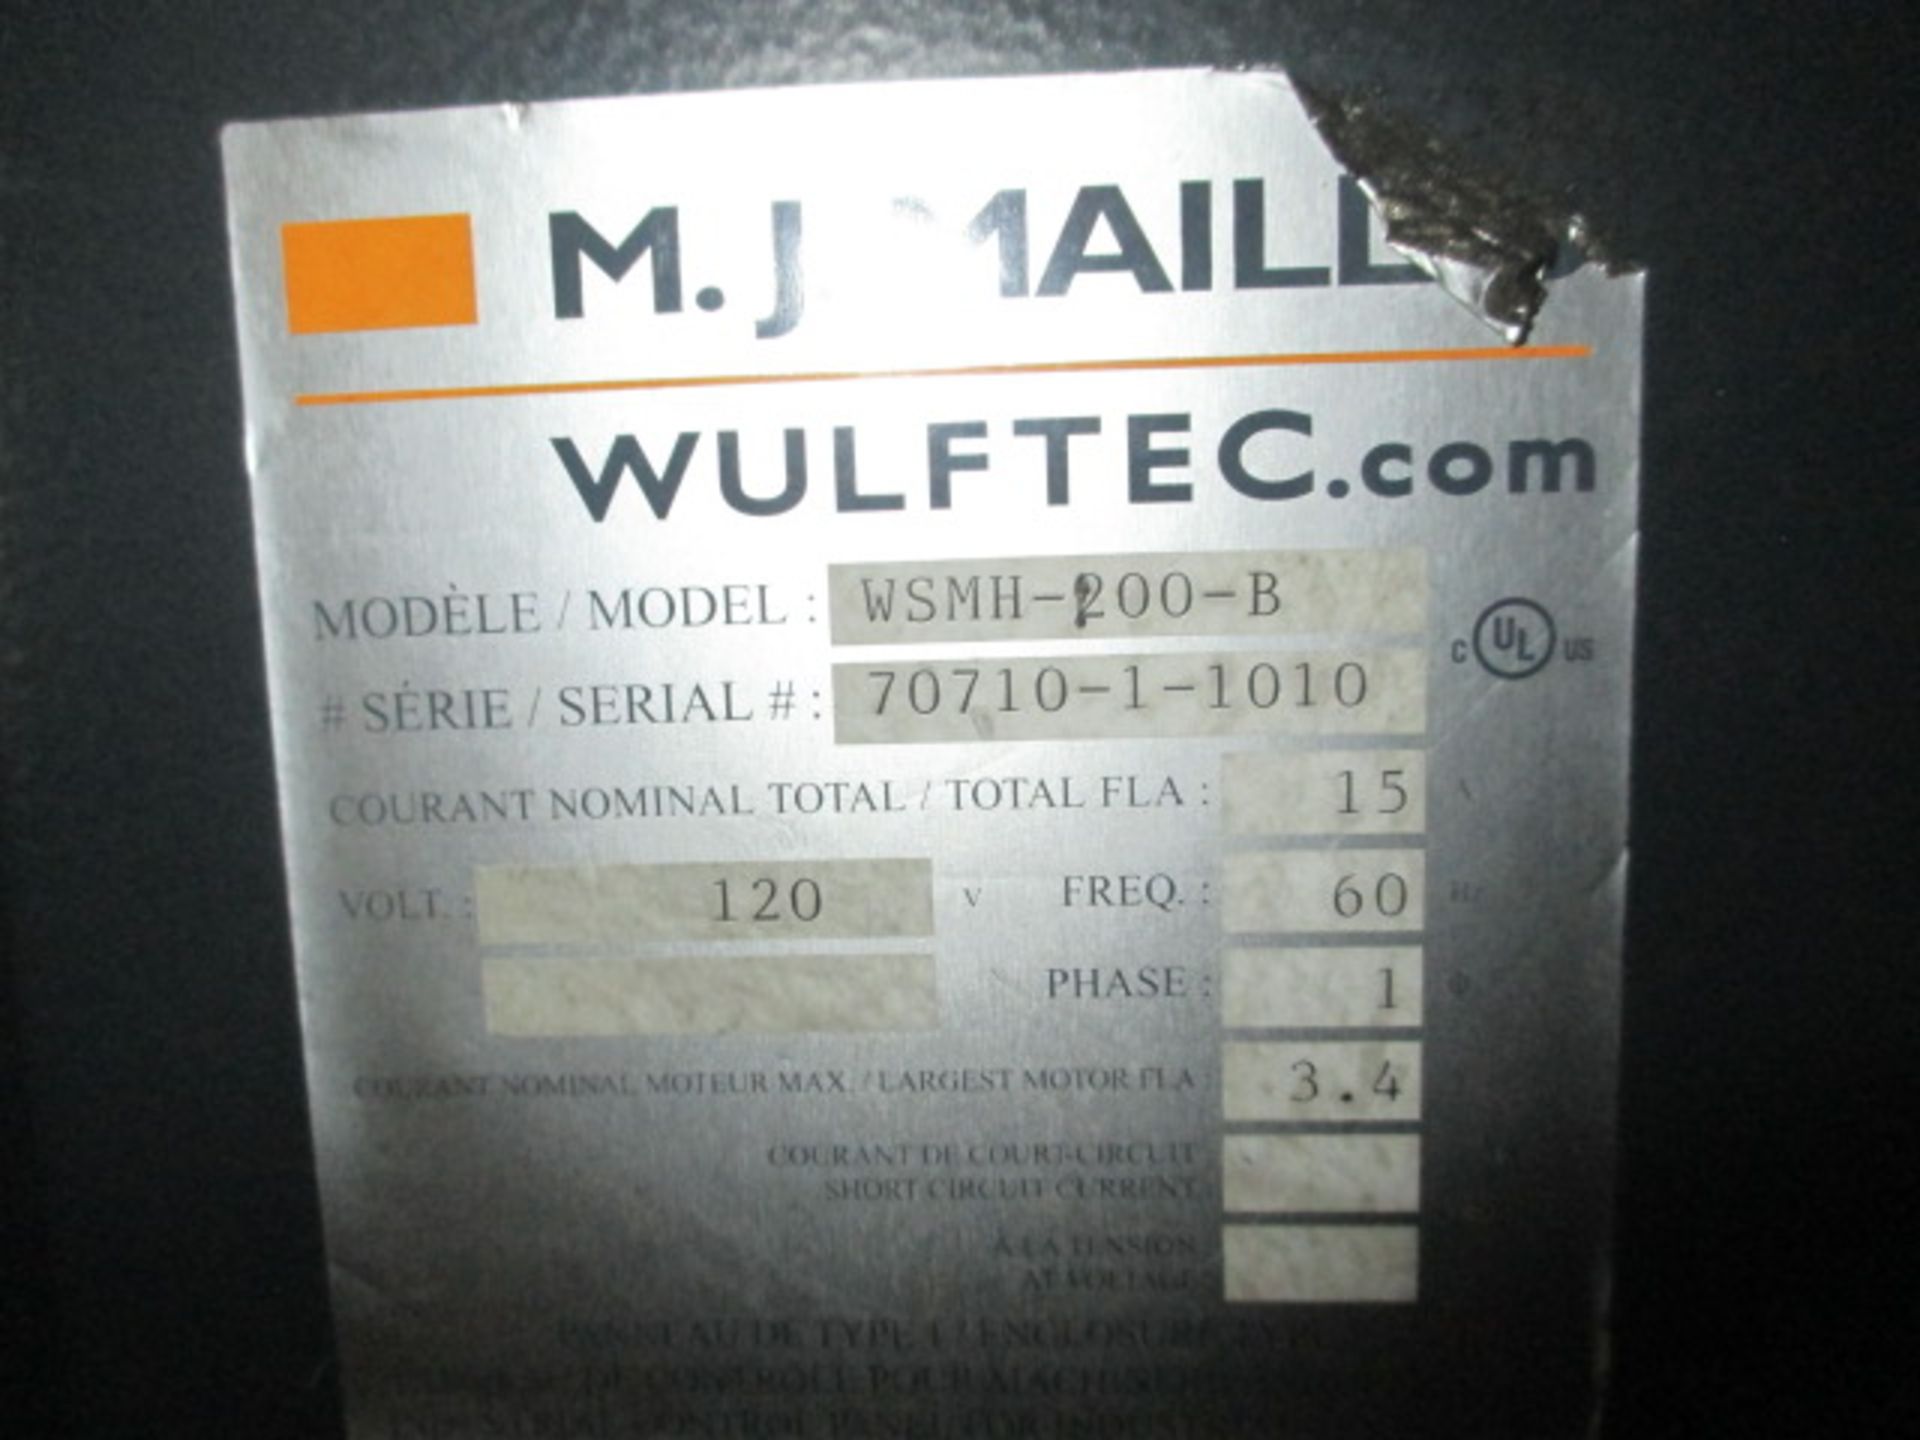 Wulftec / M.J. Maillis WSMH-200-B Semi-Automatic Turntable Stretch Wrapper. 120V, 60Hz, 15A. S/N- - Image 5 of 5